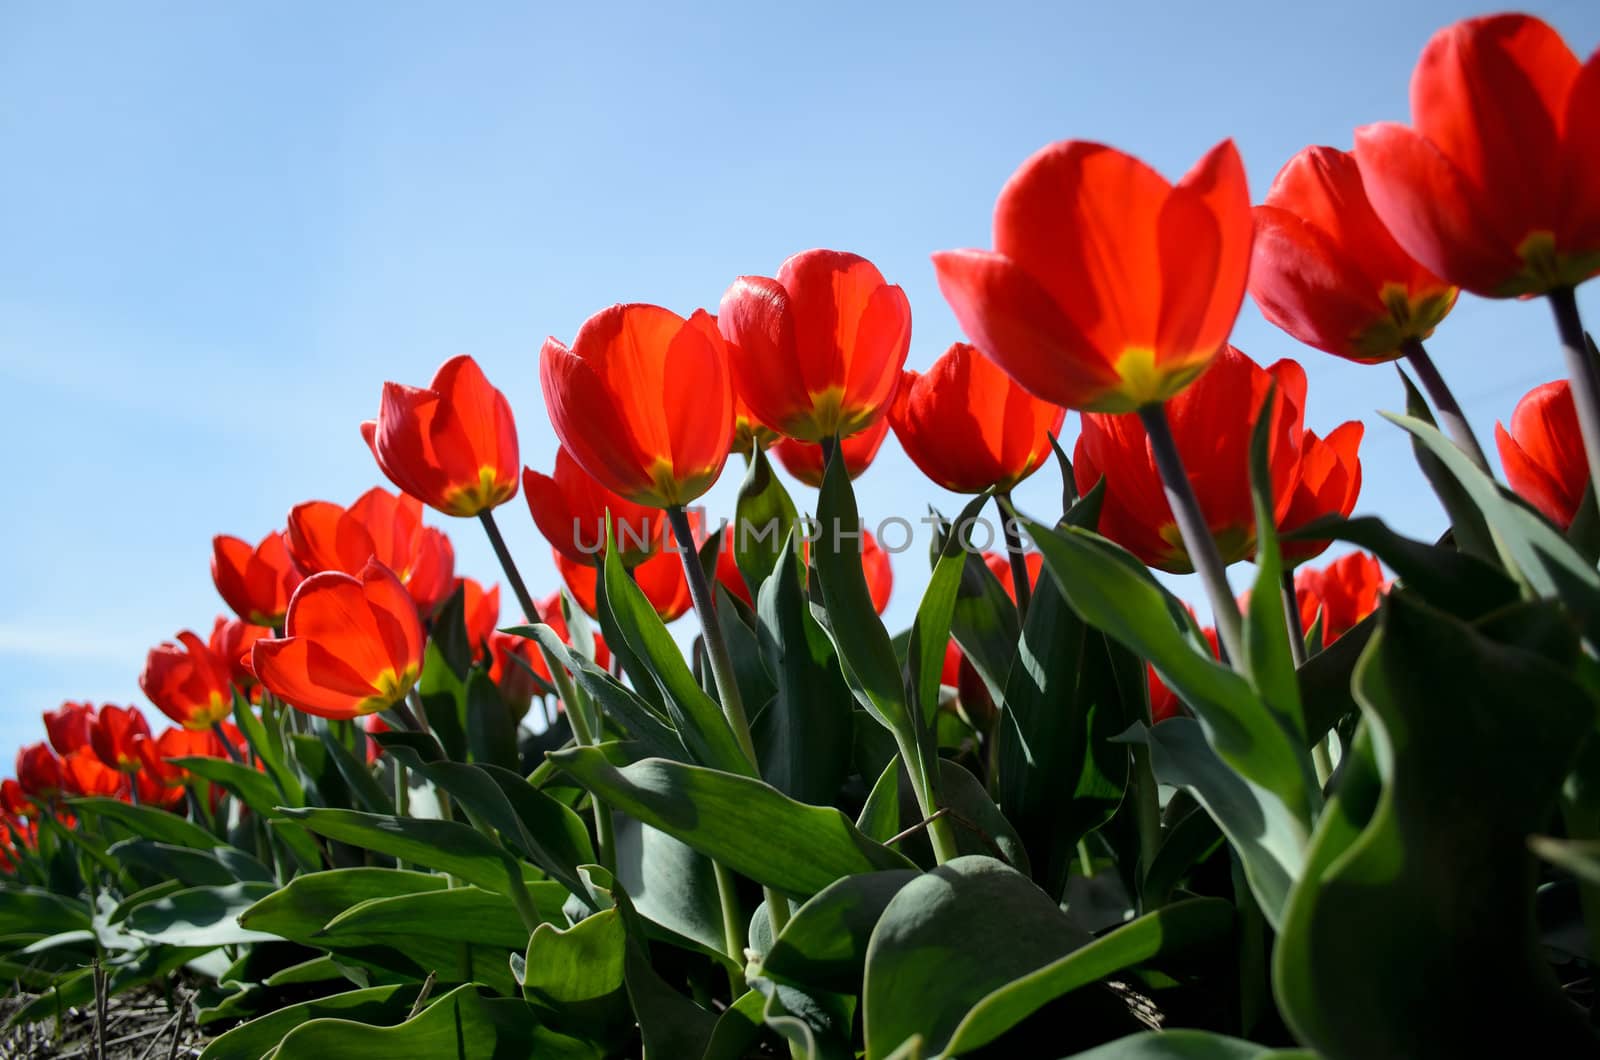 Red tulips by pljvv